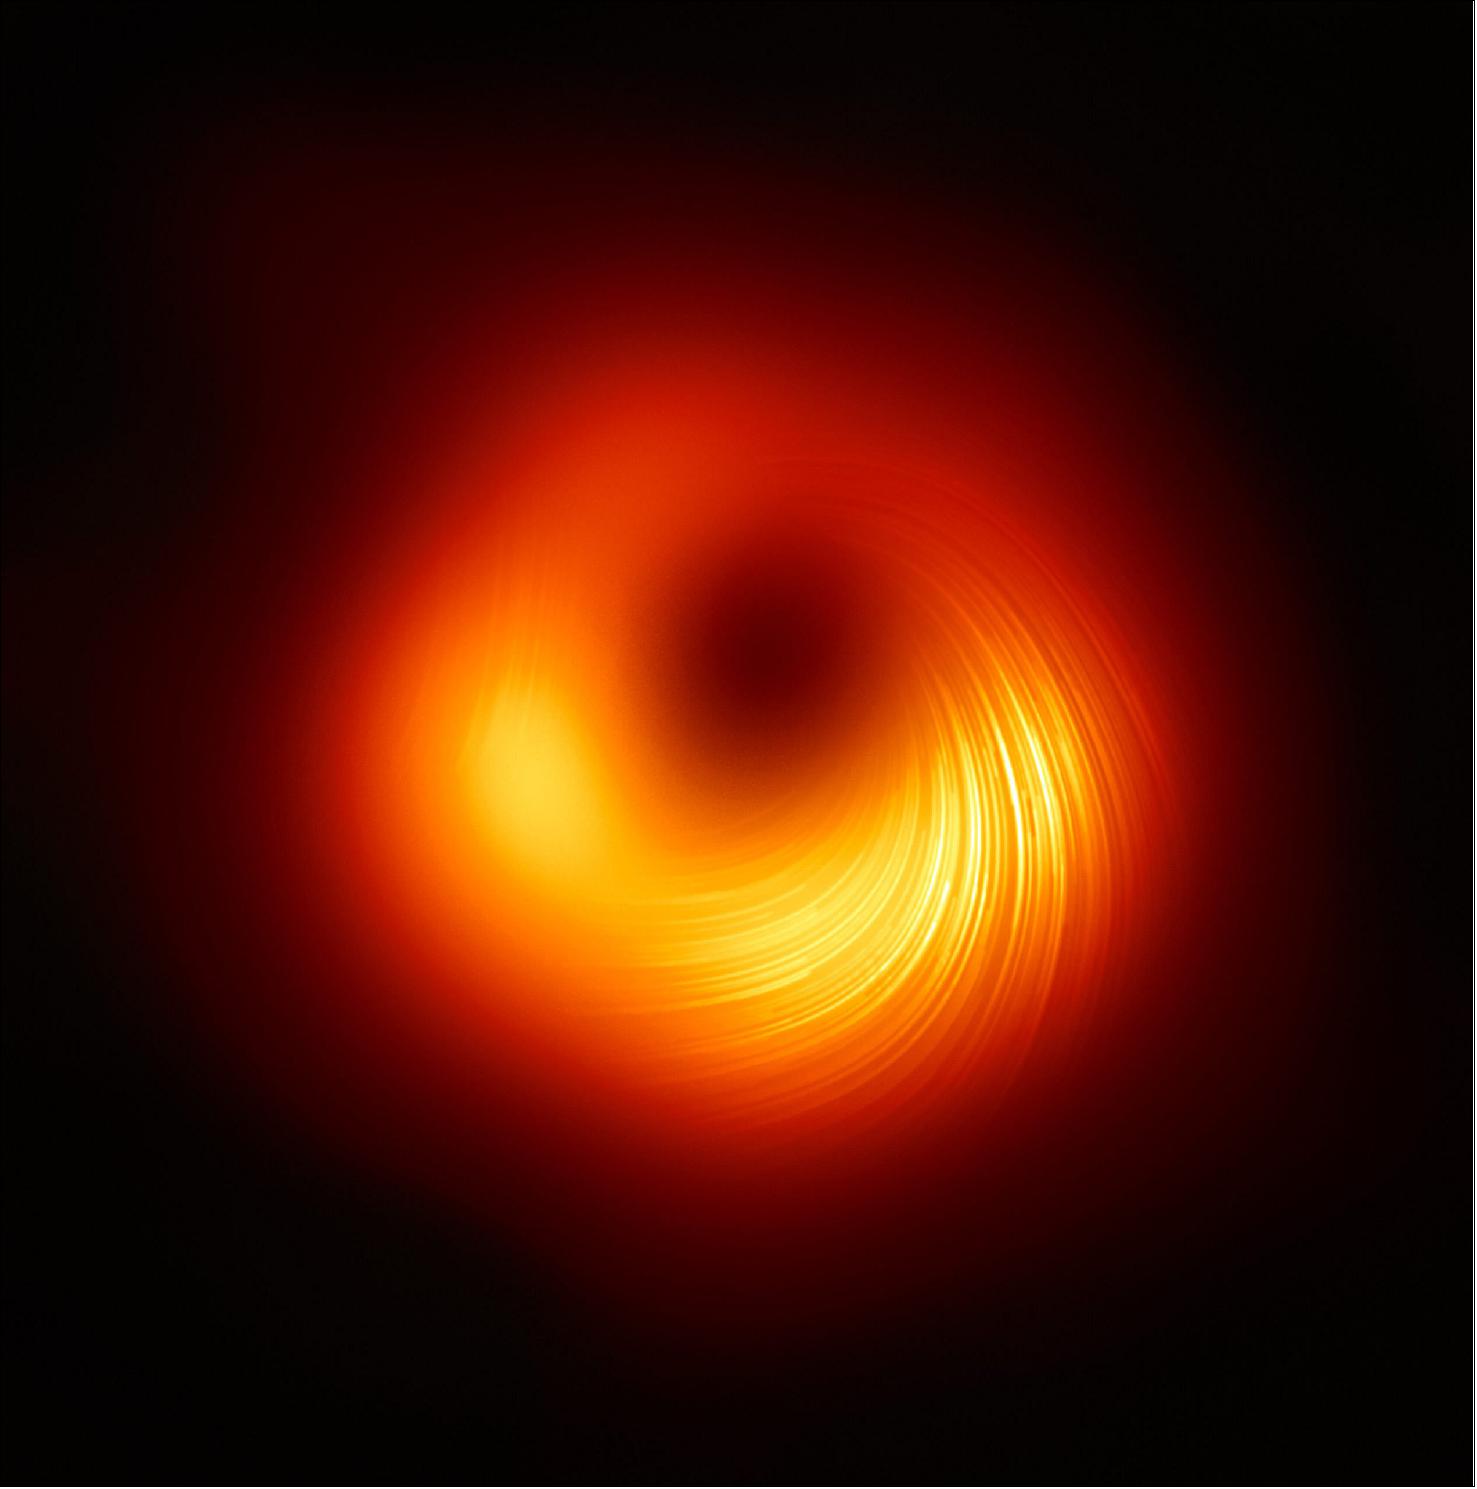 Figure 40: This image shows the polarized view of the black hole in M87. The lines mark the orientation of polarisation, which is related to the magnetic field around the shadow of the black hole (image credit: EHT Collaboration)